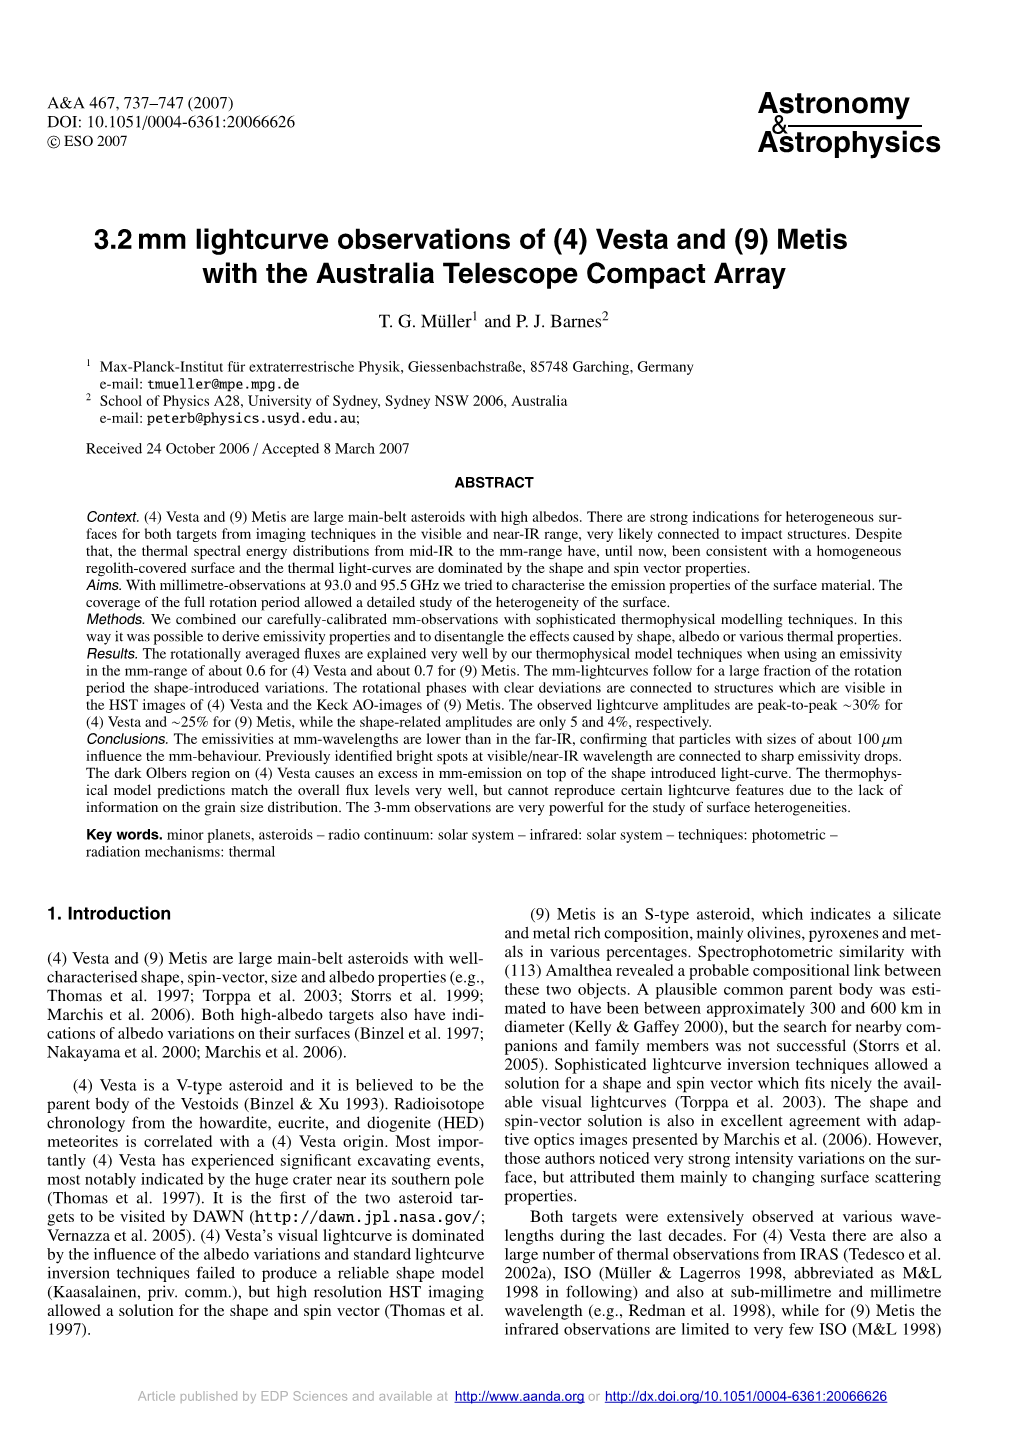 3.2 Mm Lightcurve Observations of (4) Vesta and (9) Metis with the Australia Telescope Compact Array